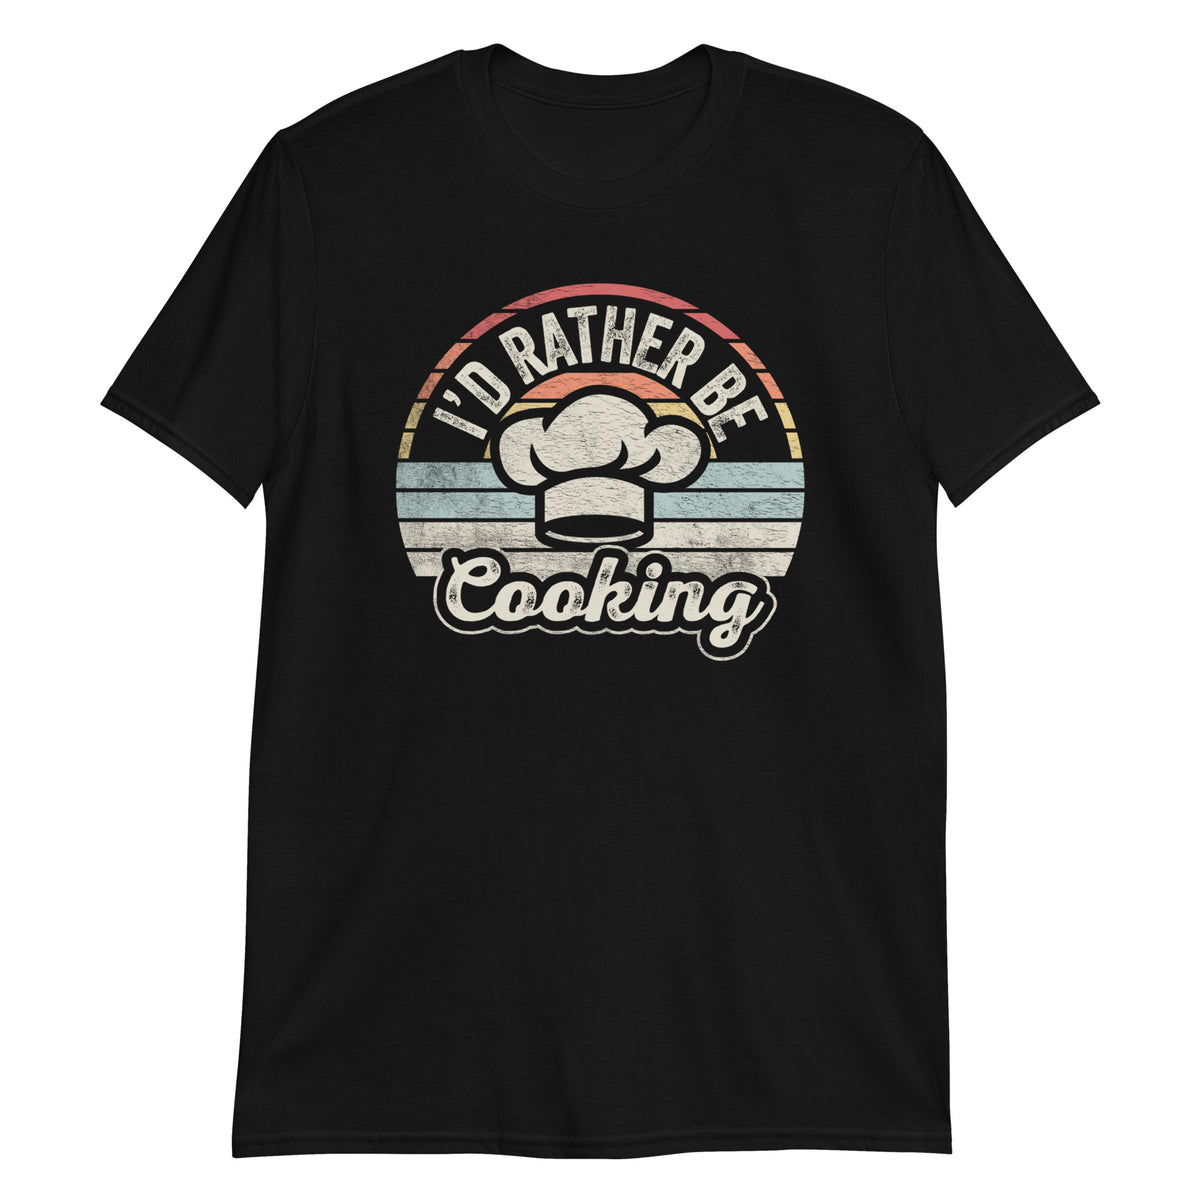 I'D Rather Be Cooking T-Shirt